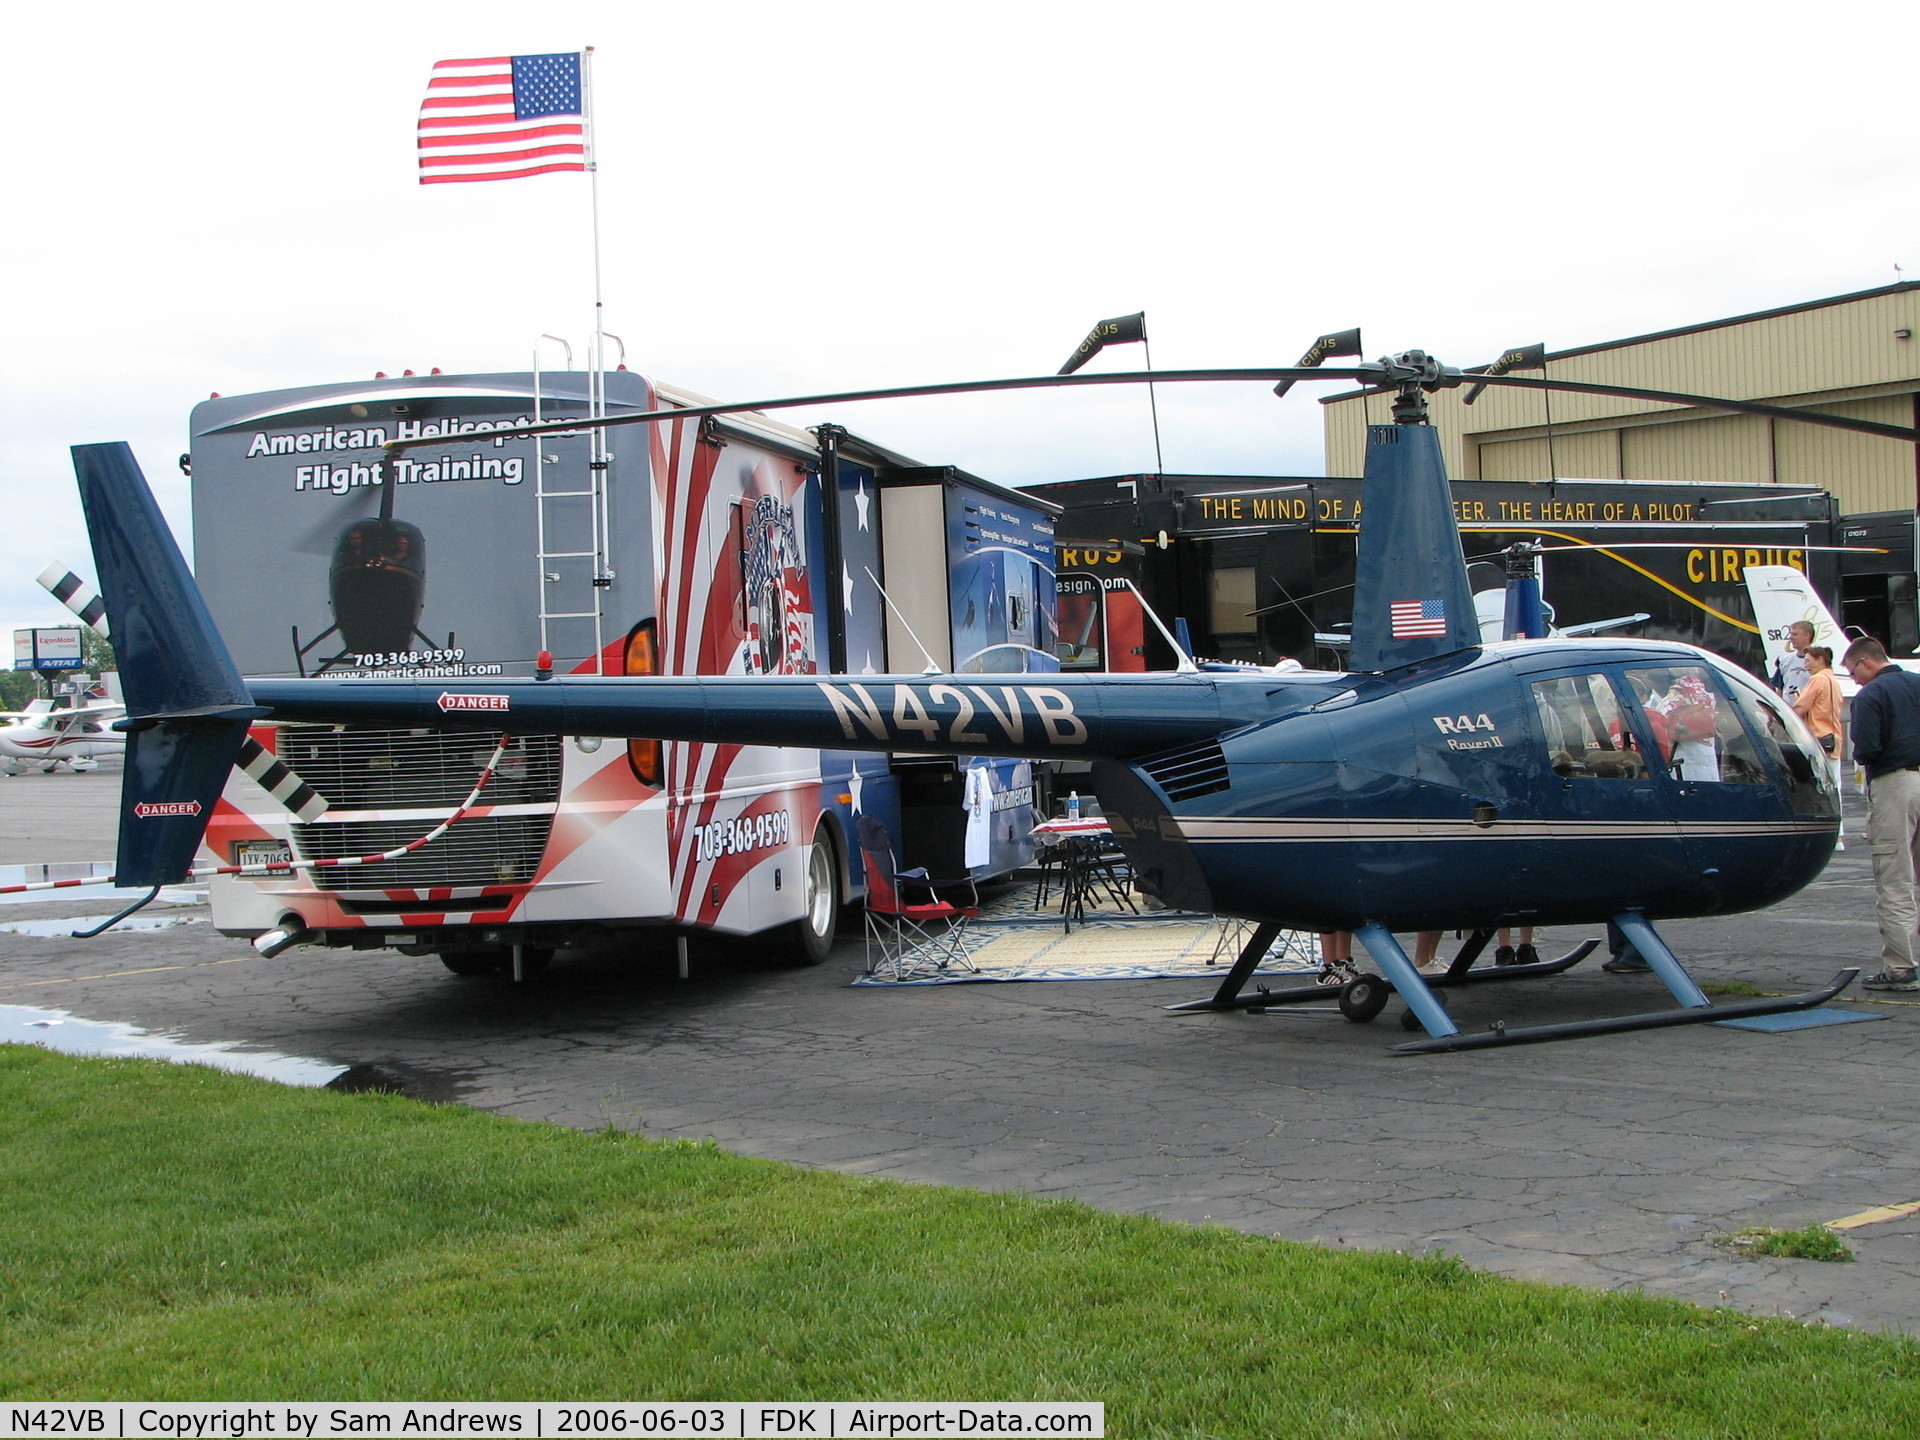 N42VB, 2003 Robinson R44 II C/N 10130, This beauty was at the AOPA Fly-in static display for Robison helos